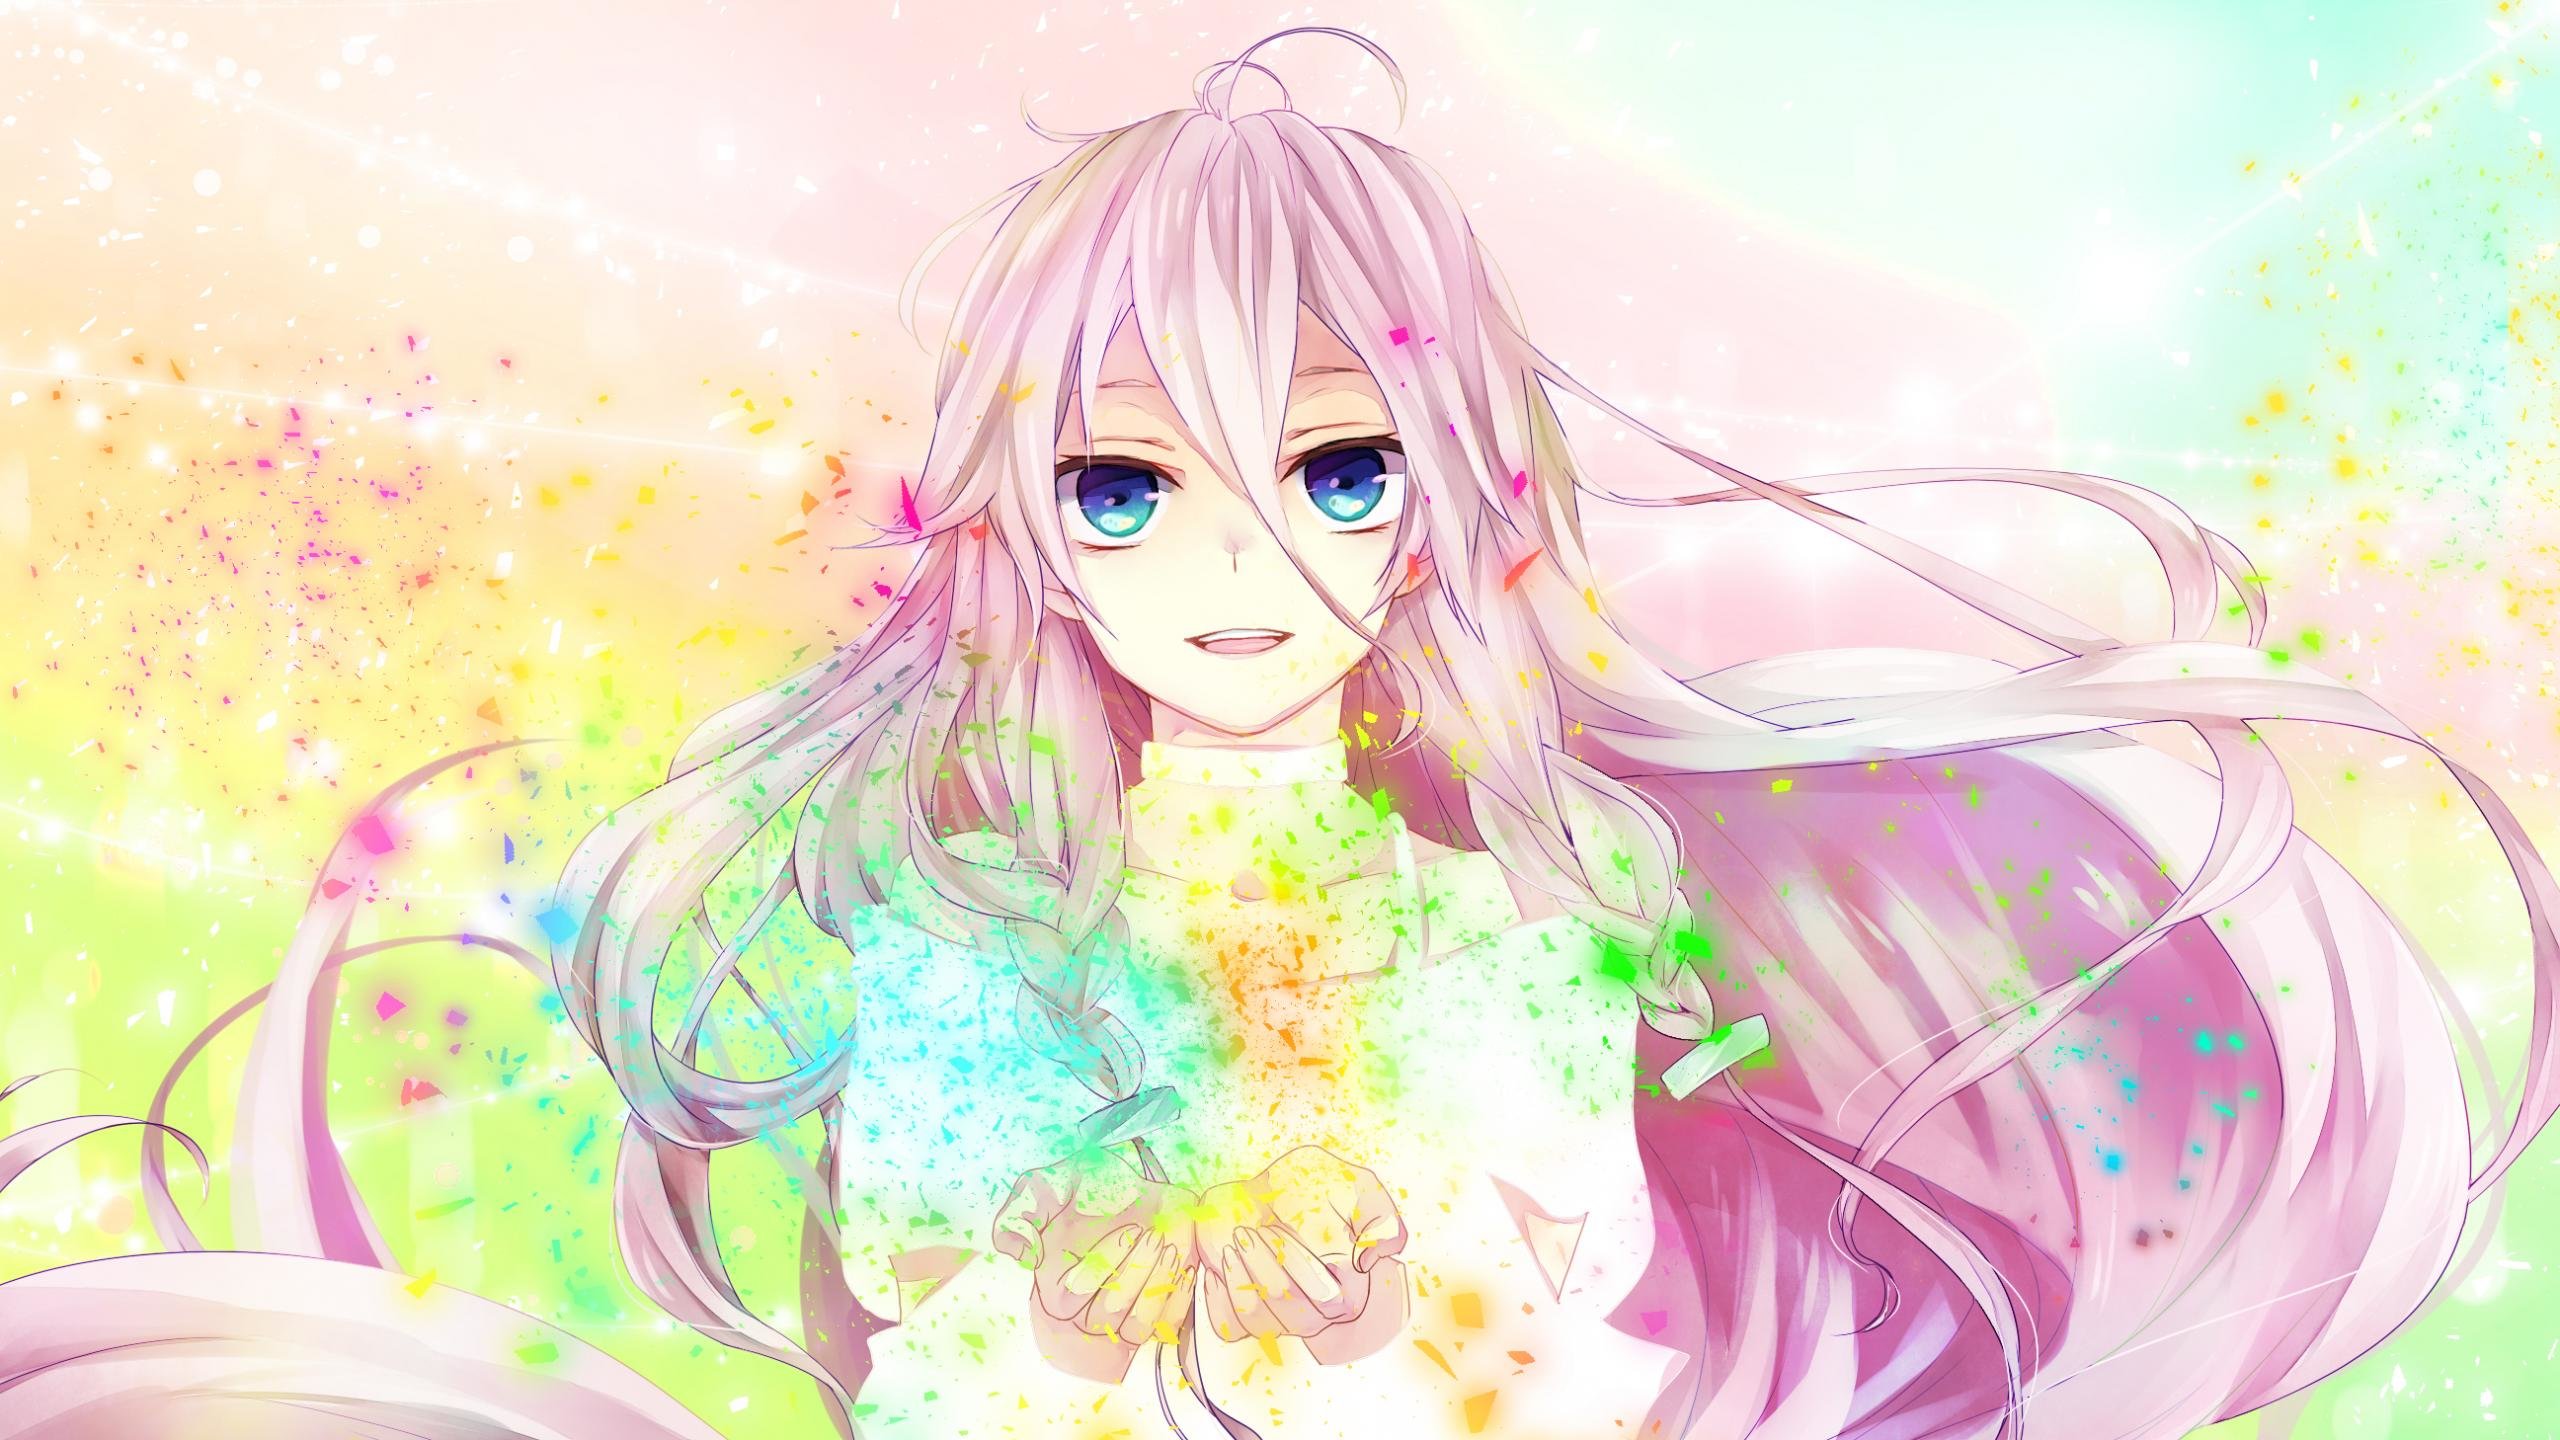 Download hd 2560x1440 IA (Vocaloid) desktop background ID:3865 for free